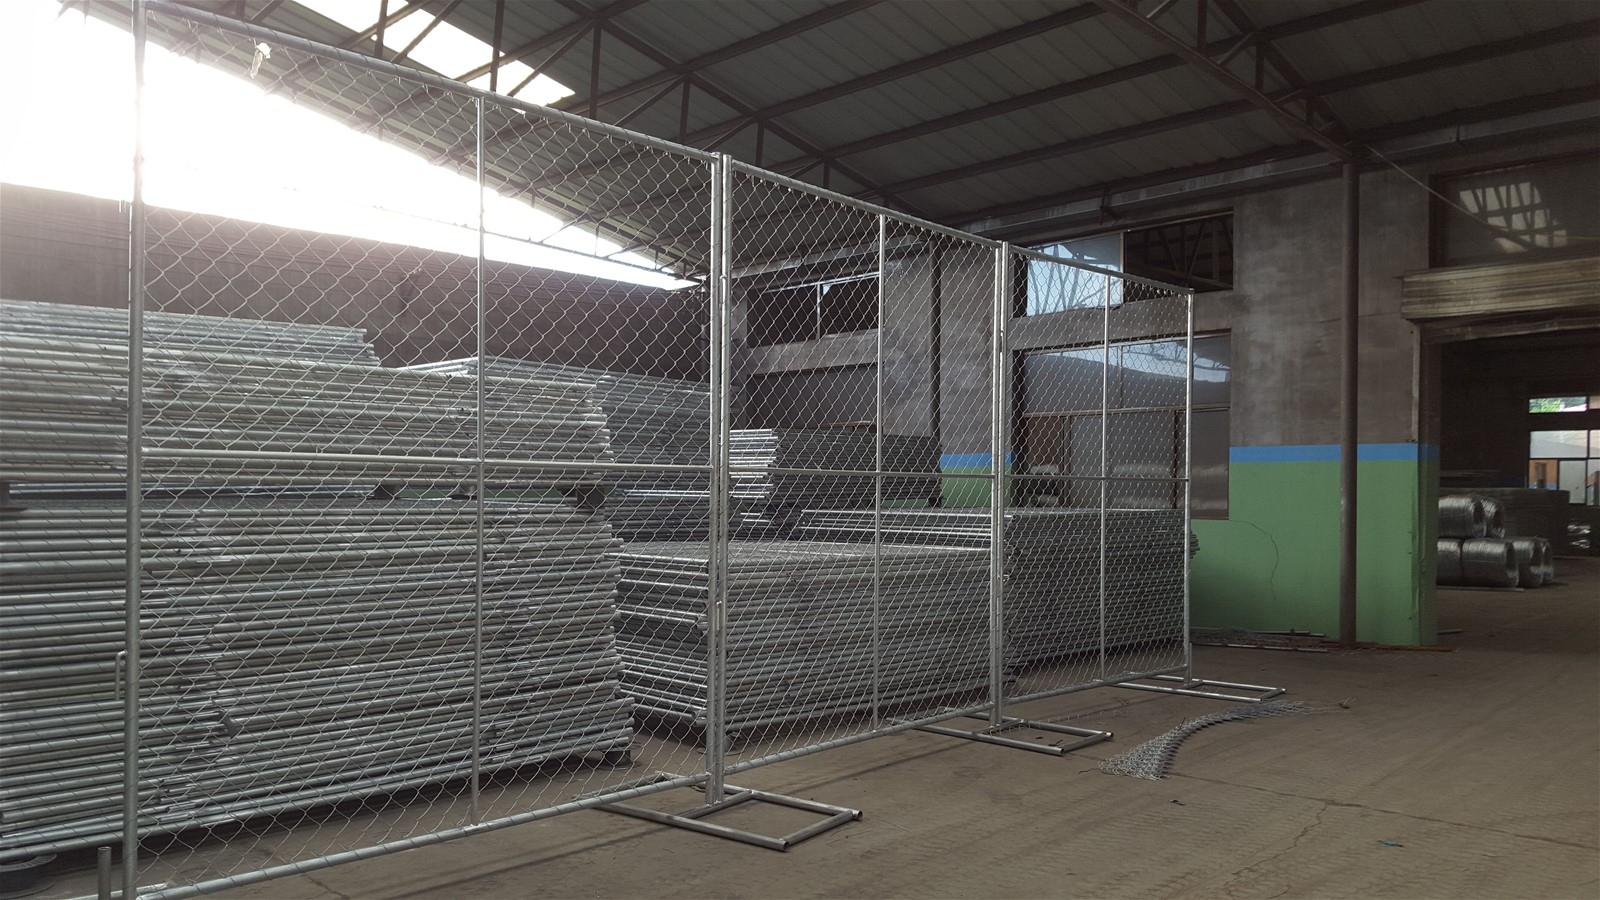 Temporary Chain Link Protection Fence